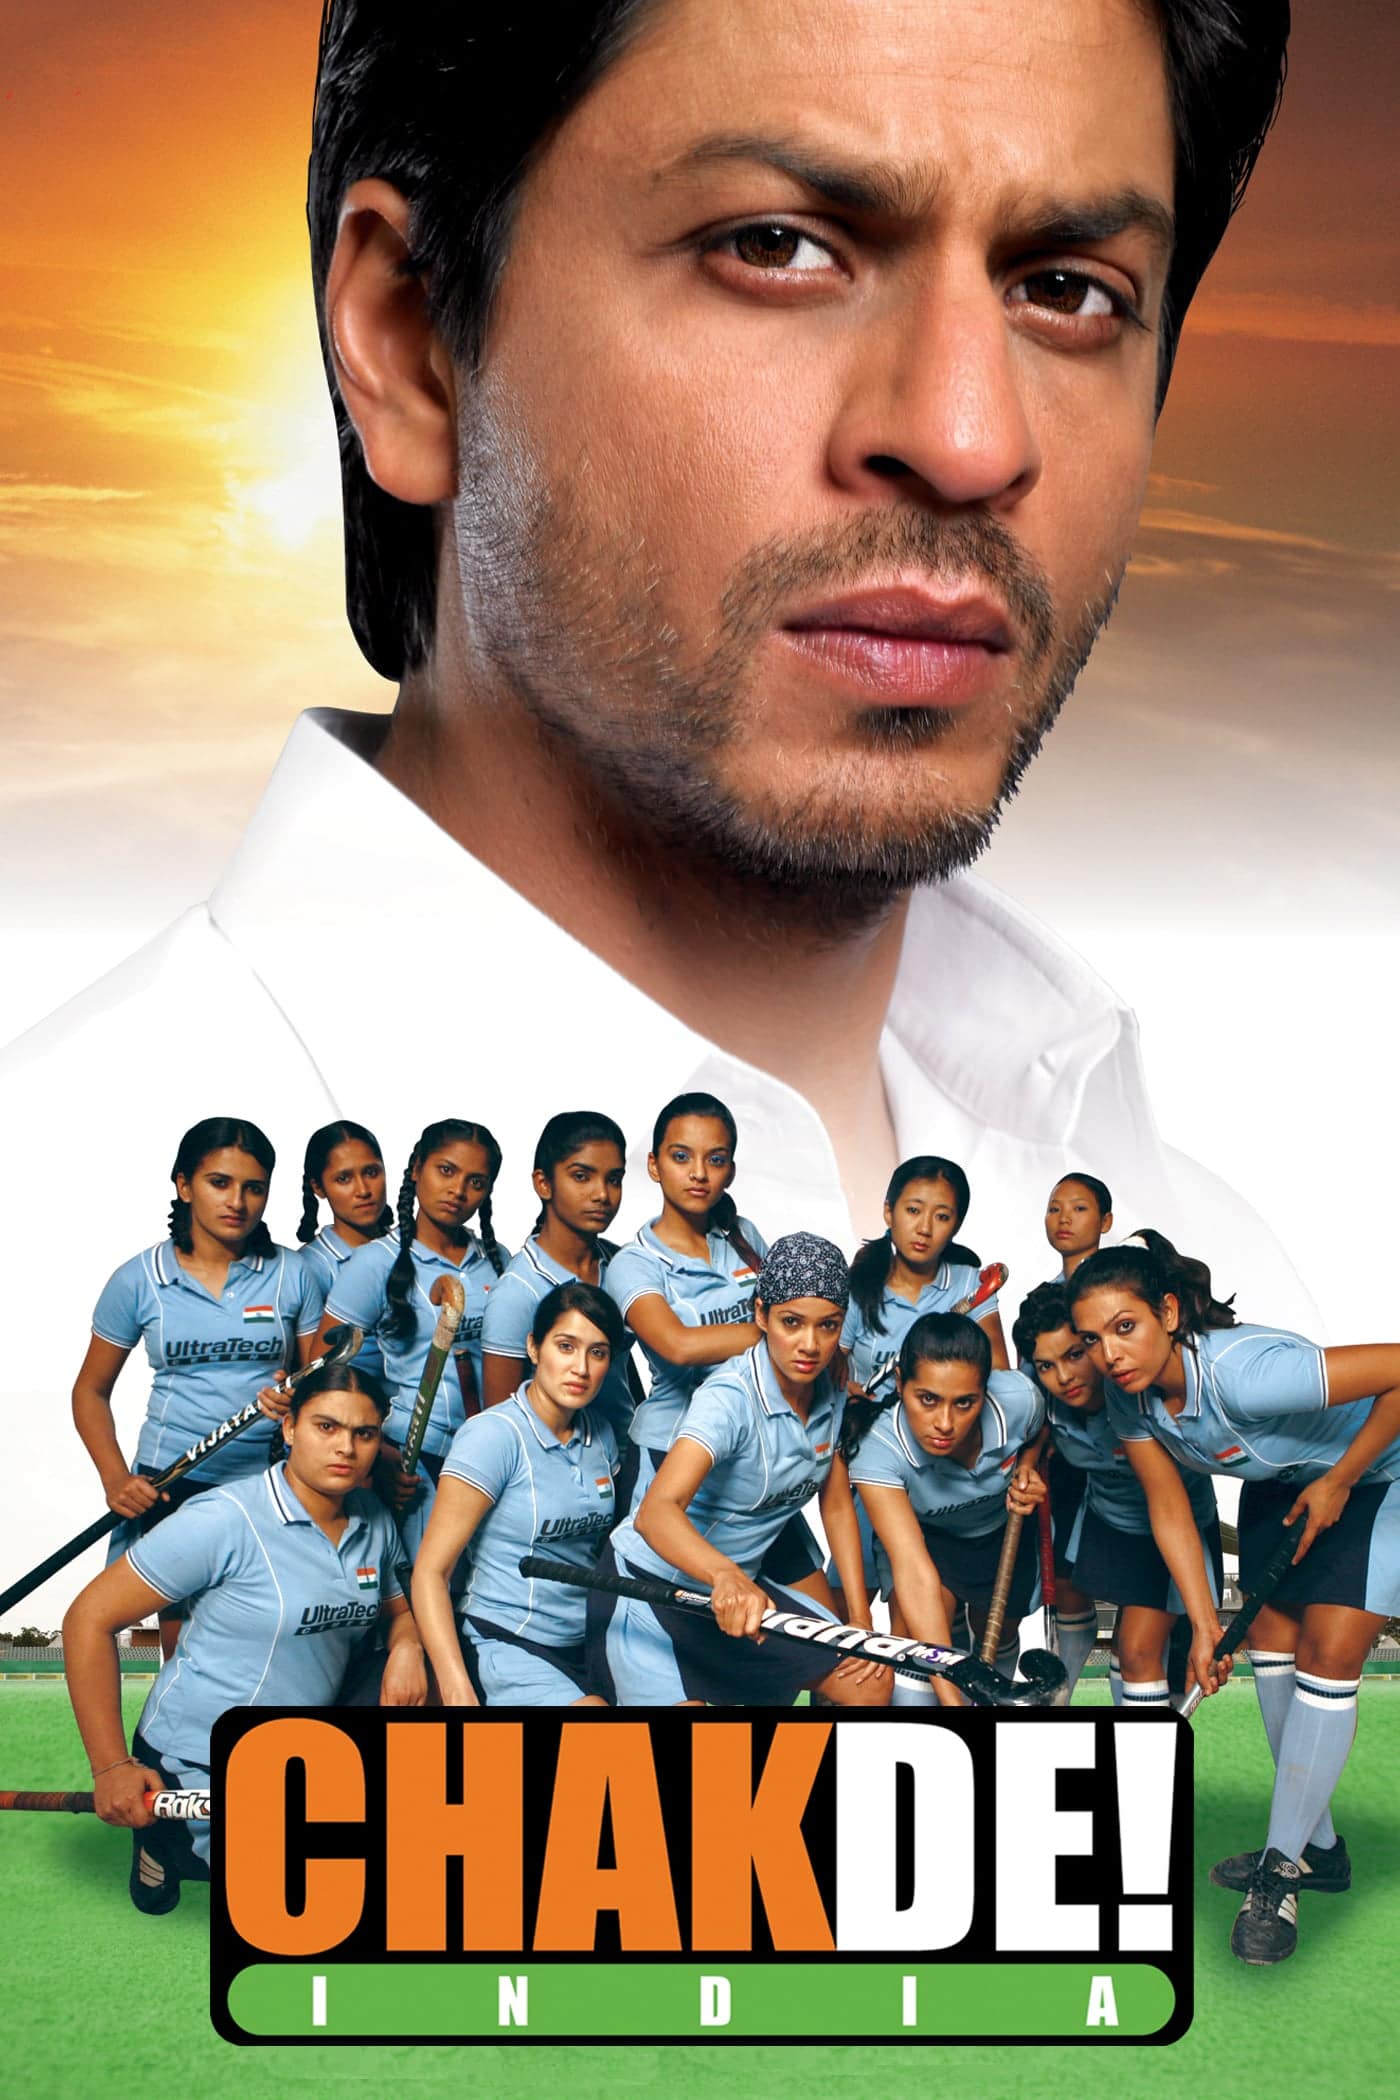 Poster for the movie "Chak De! India"